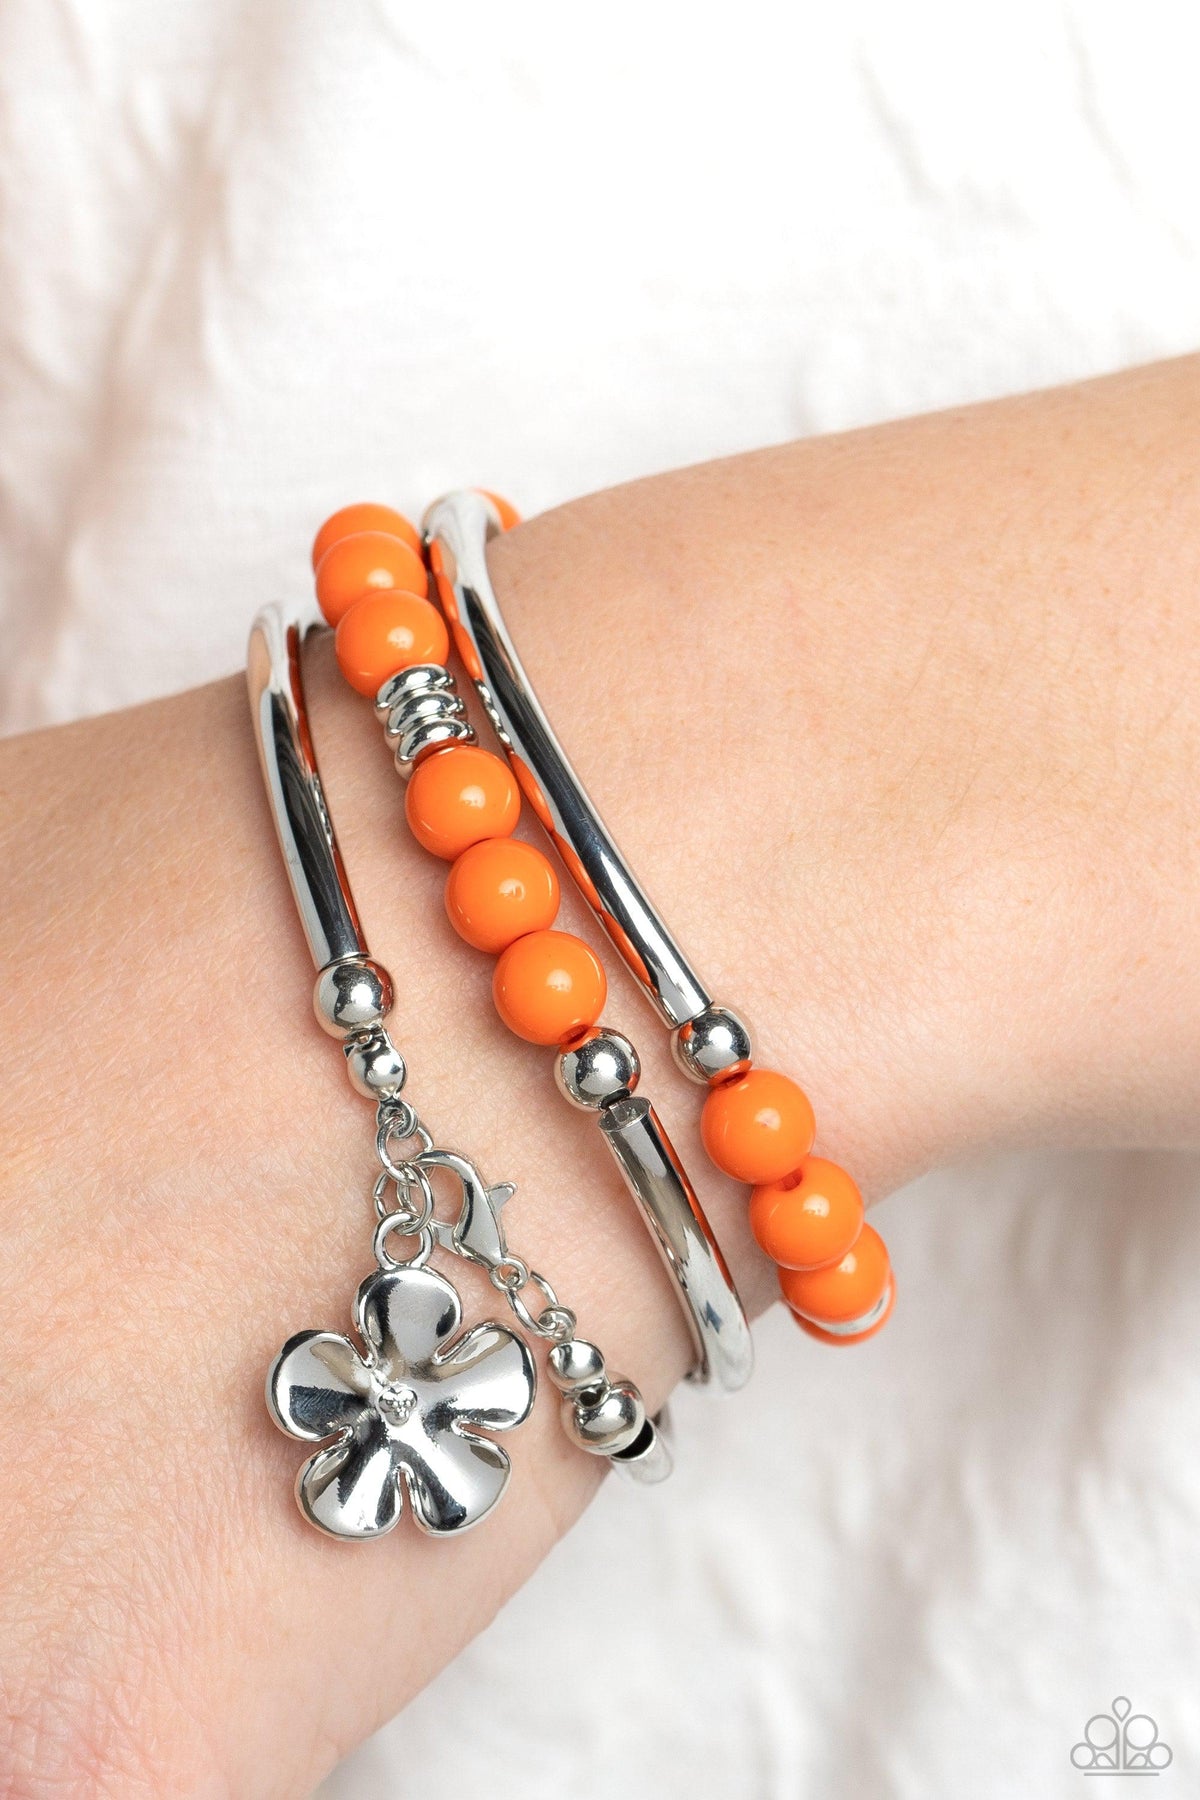 Off the WRAP Orange Floral Coil Bracelet - Paparazzi Accessories-on model - CarasShop.com - $5 Jewelry by Cara Jewels